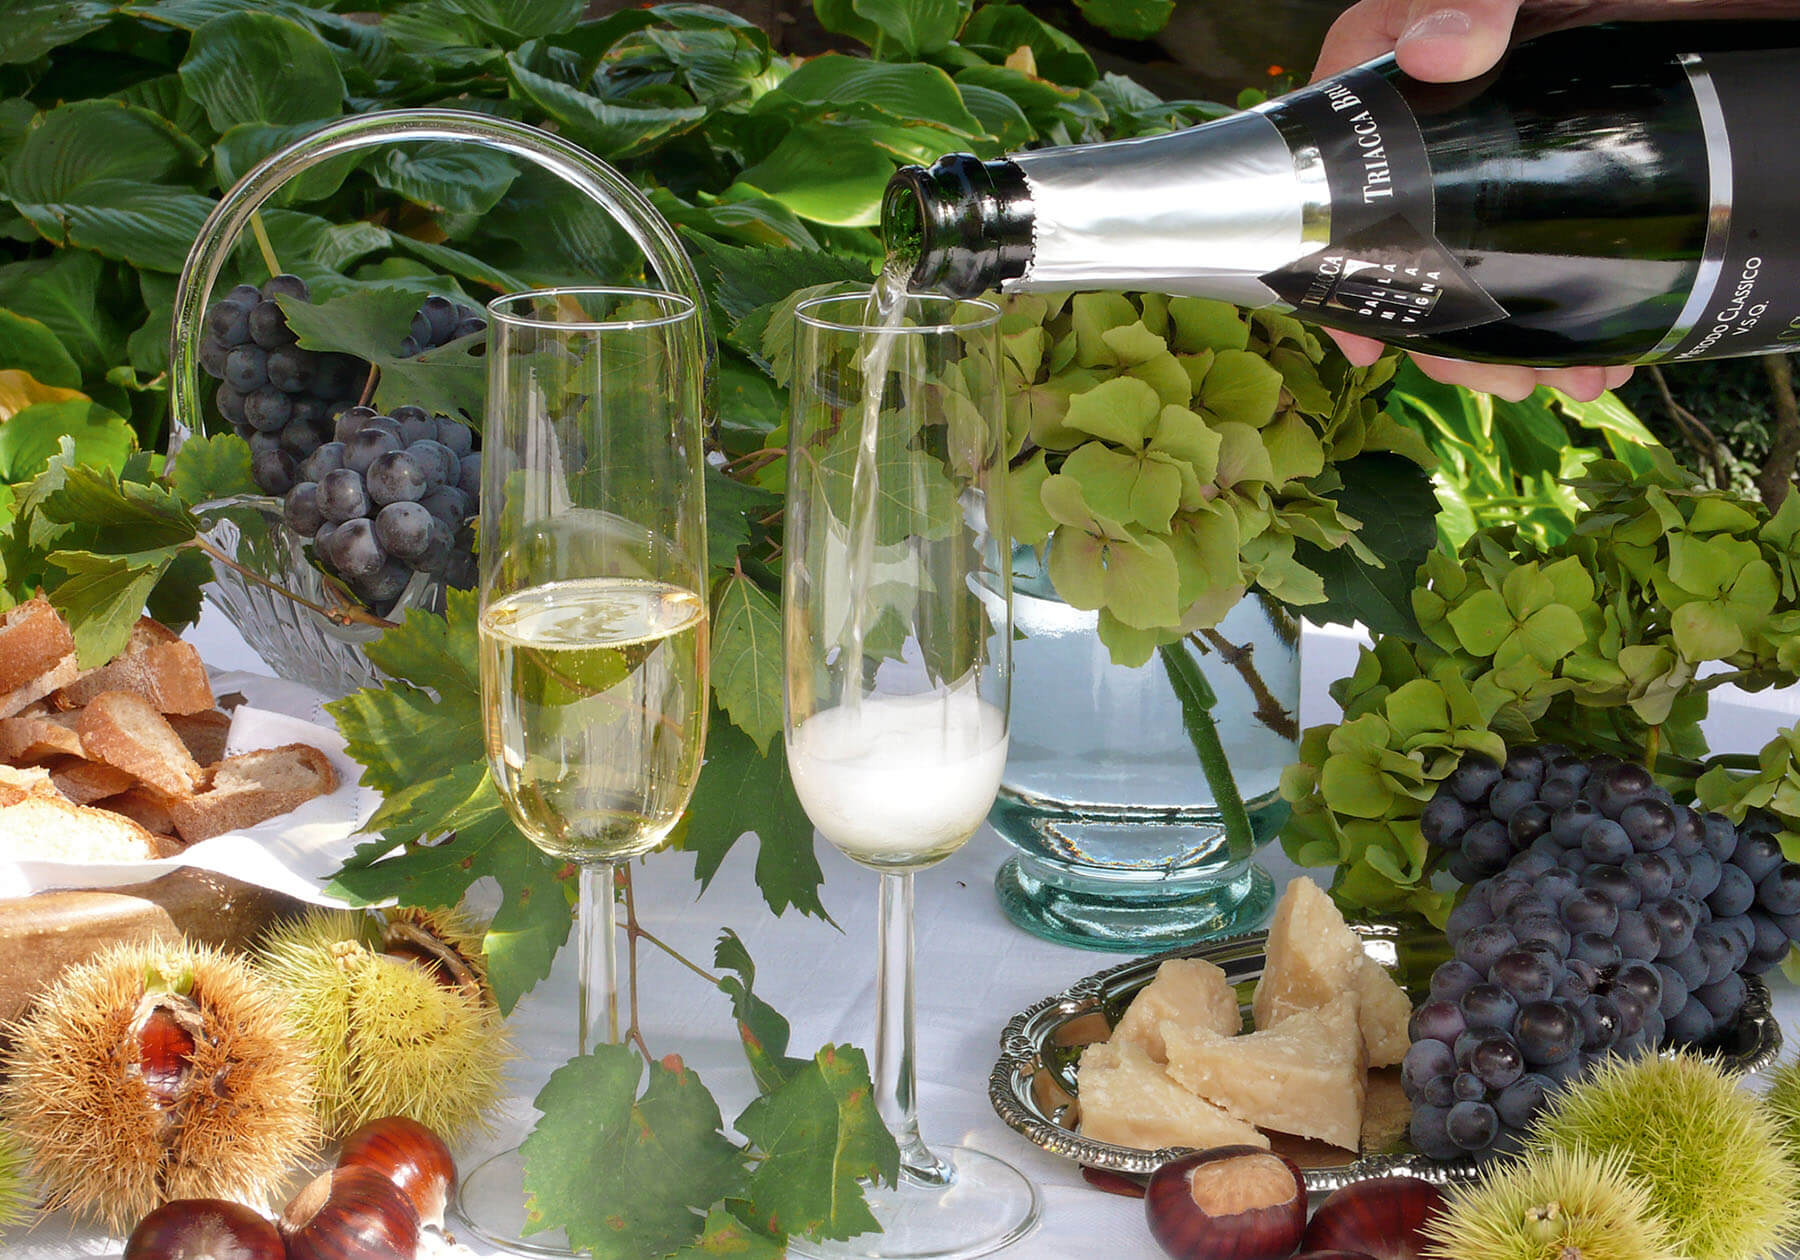 toast with Triacca Brut from the Triacca winery